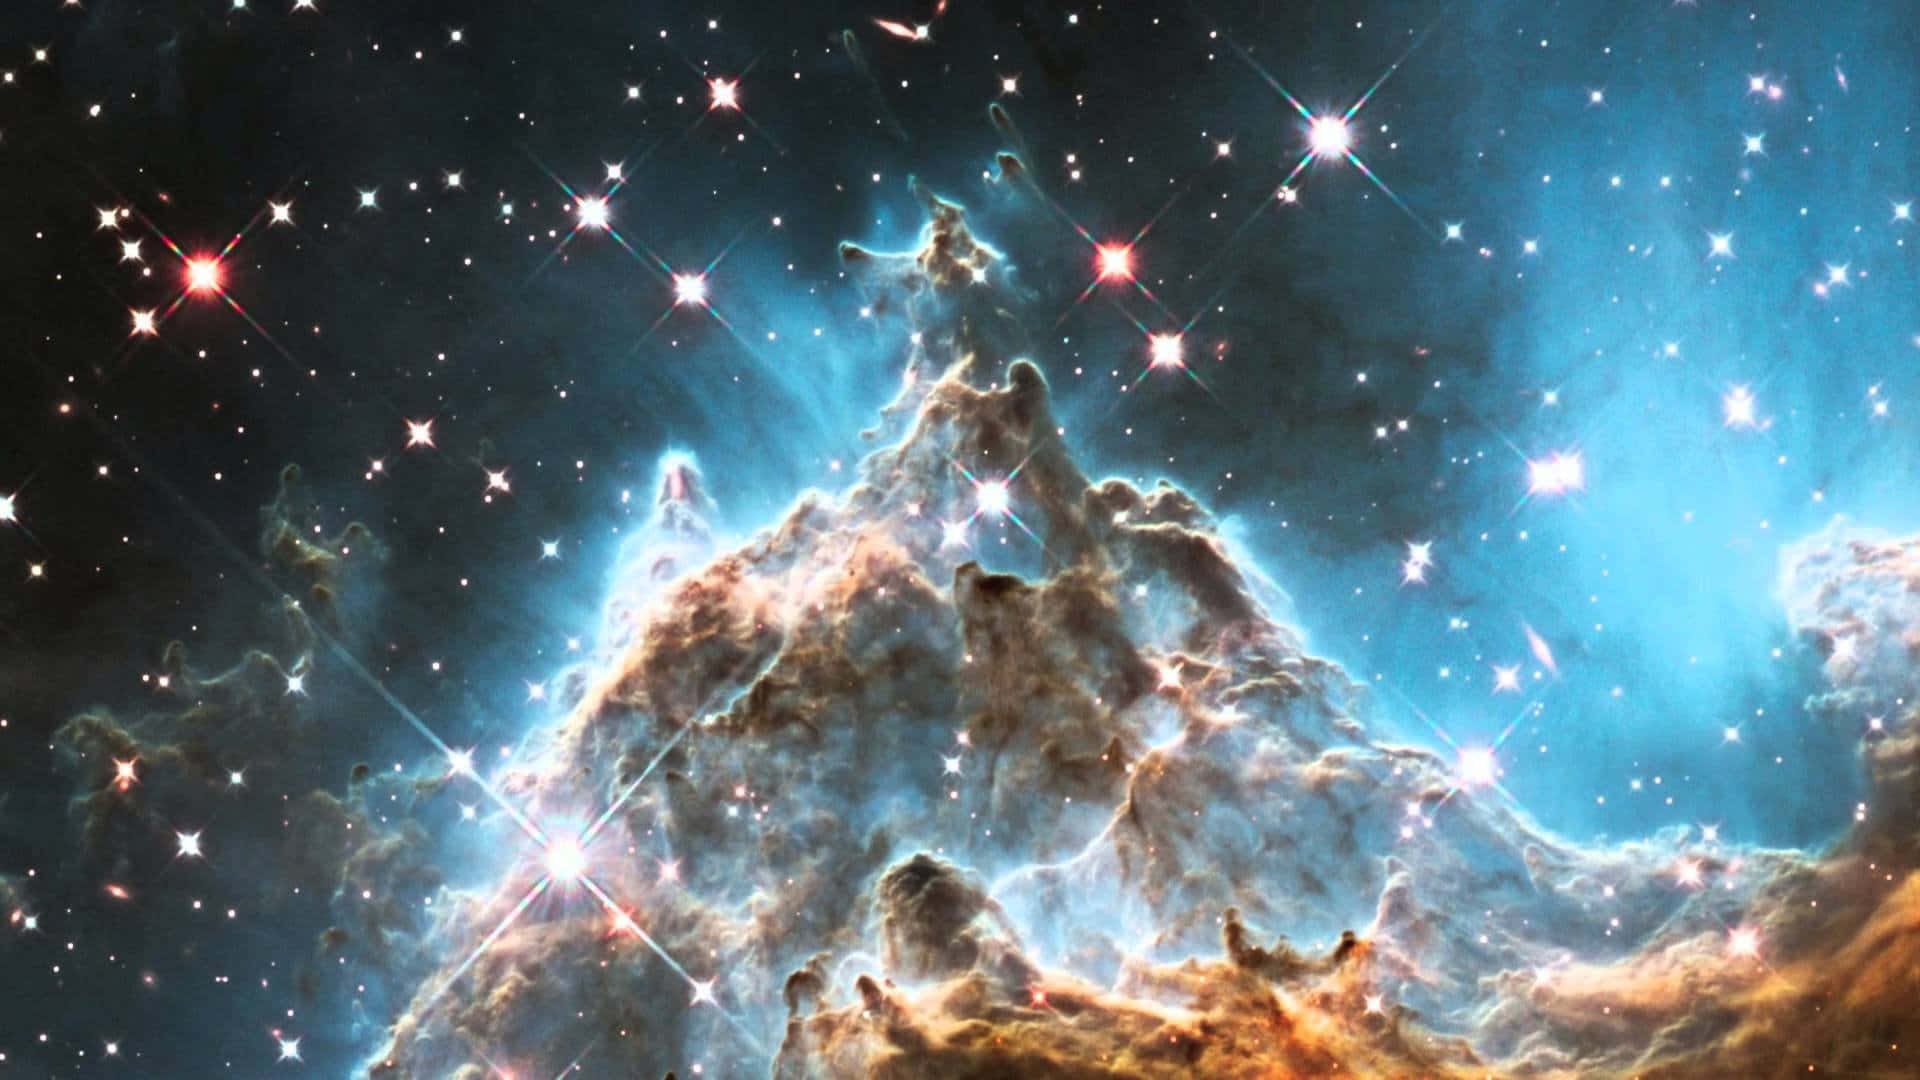 "Space-Lofted Wonders From the Hubble Telescope" Wallpaper